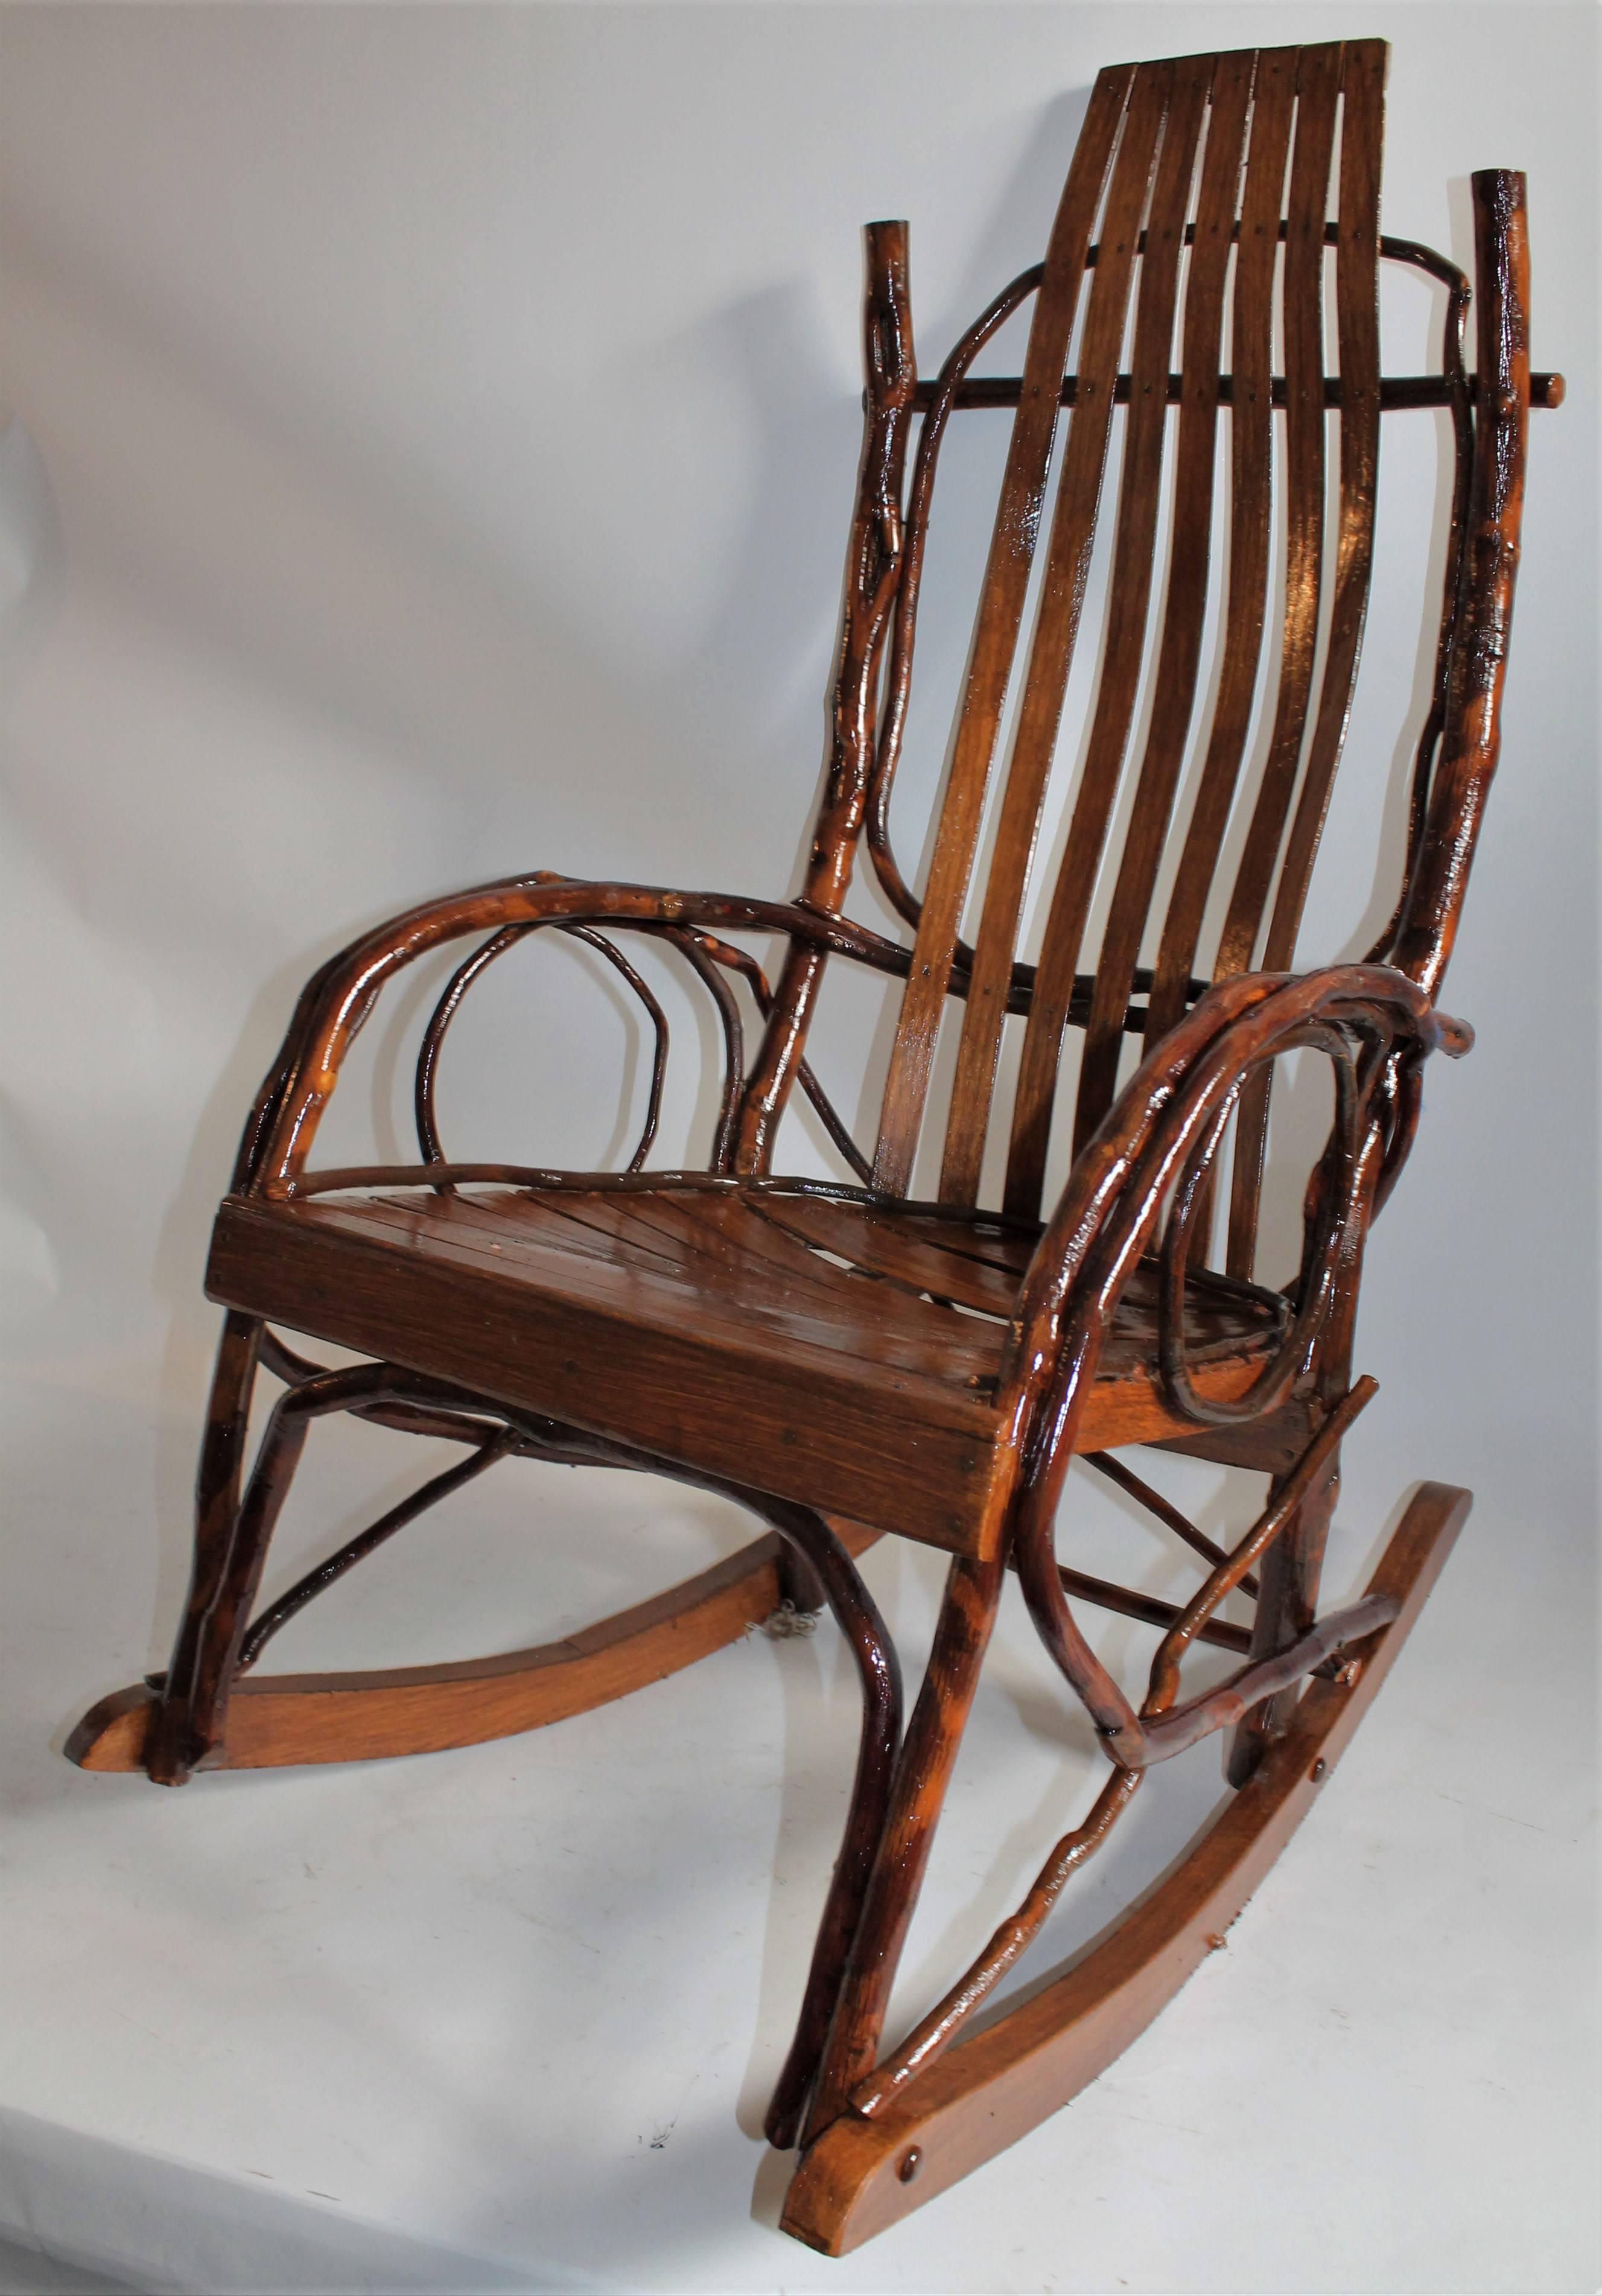 This bentwood rustic Amish rocking chair is from Ohio and is in very good condition. It is from the 1940s with cabin look. It is super comfortable.
 